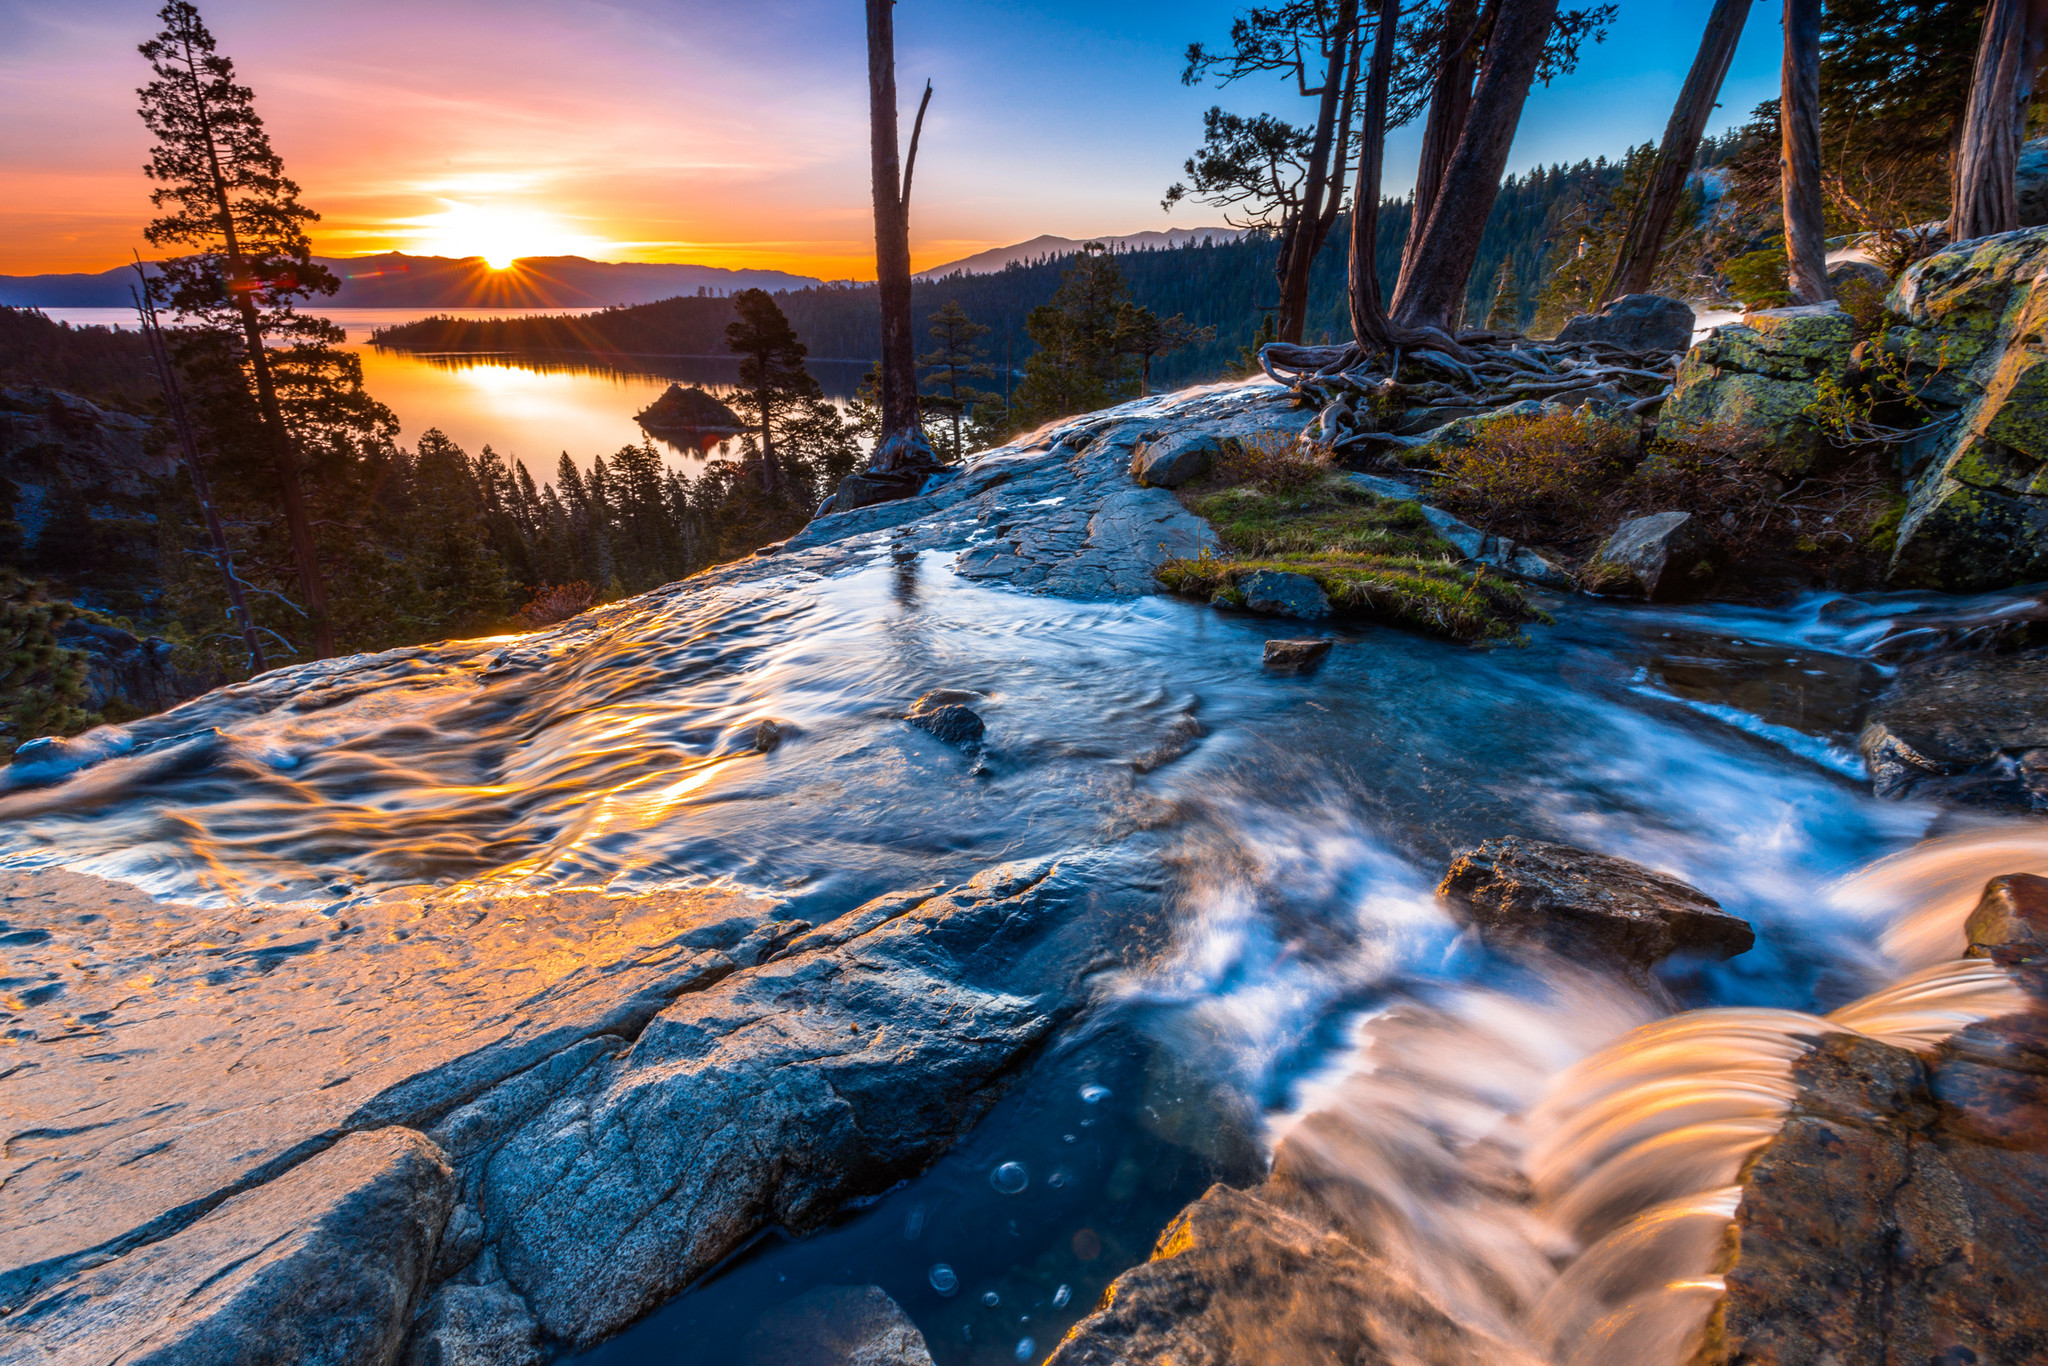 Sunset over Lake Tahoe with clear blue waters reflecting the sky